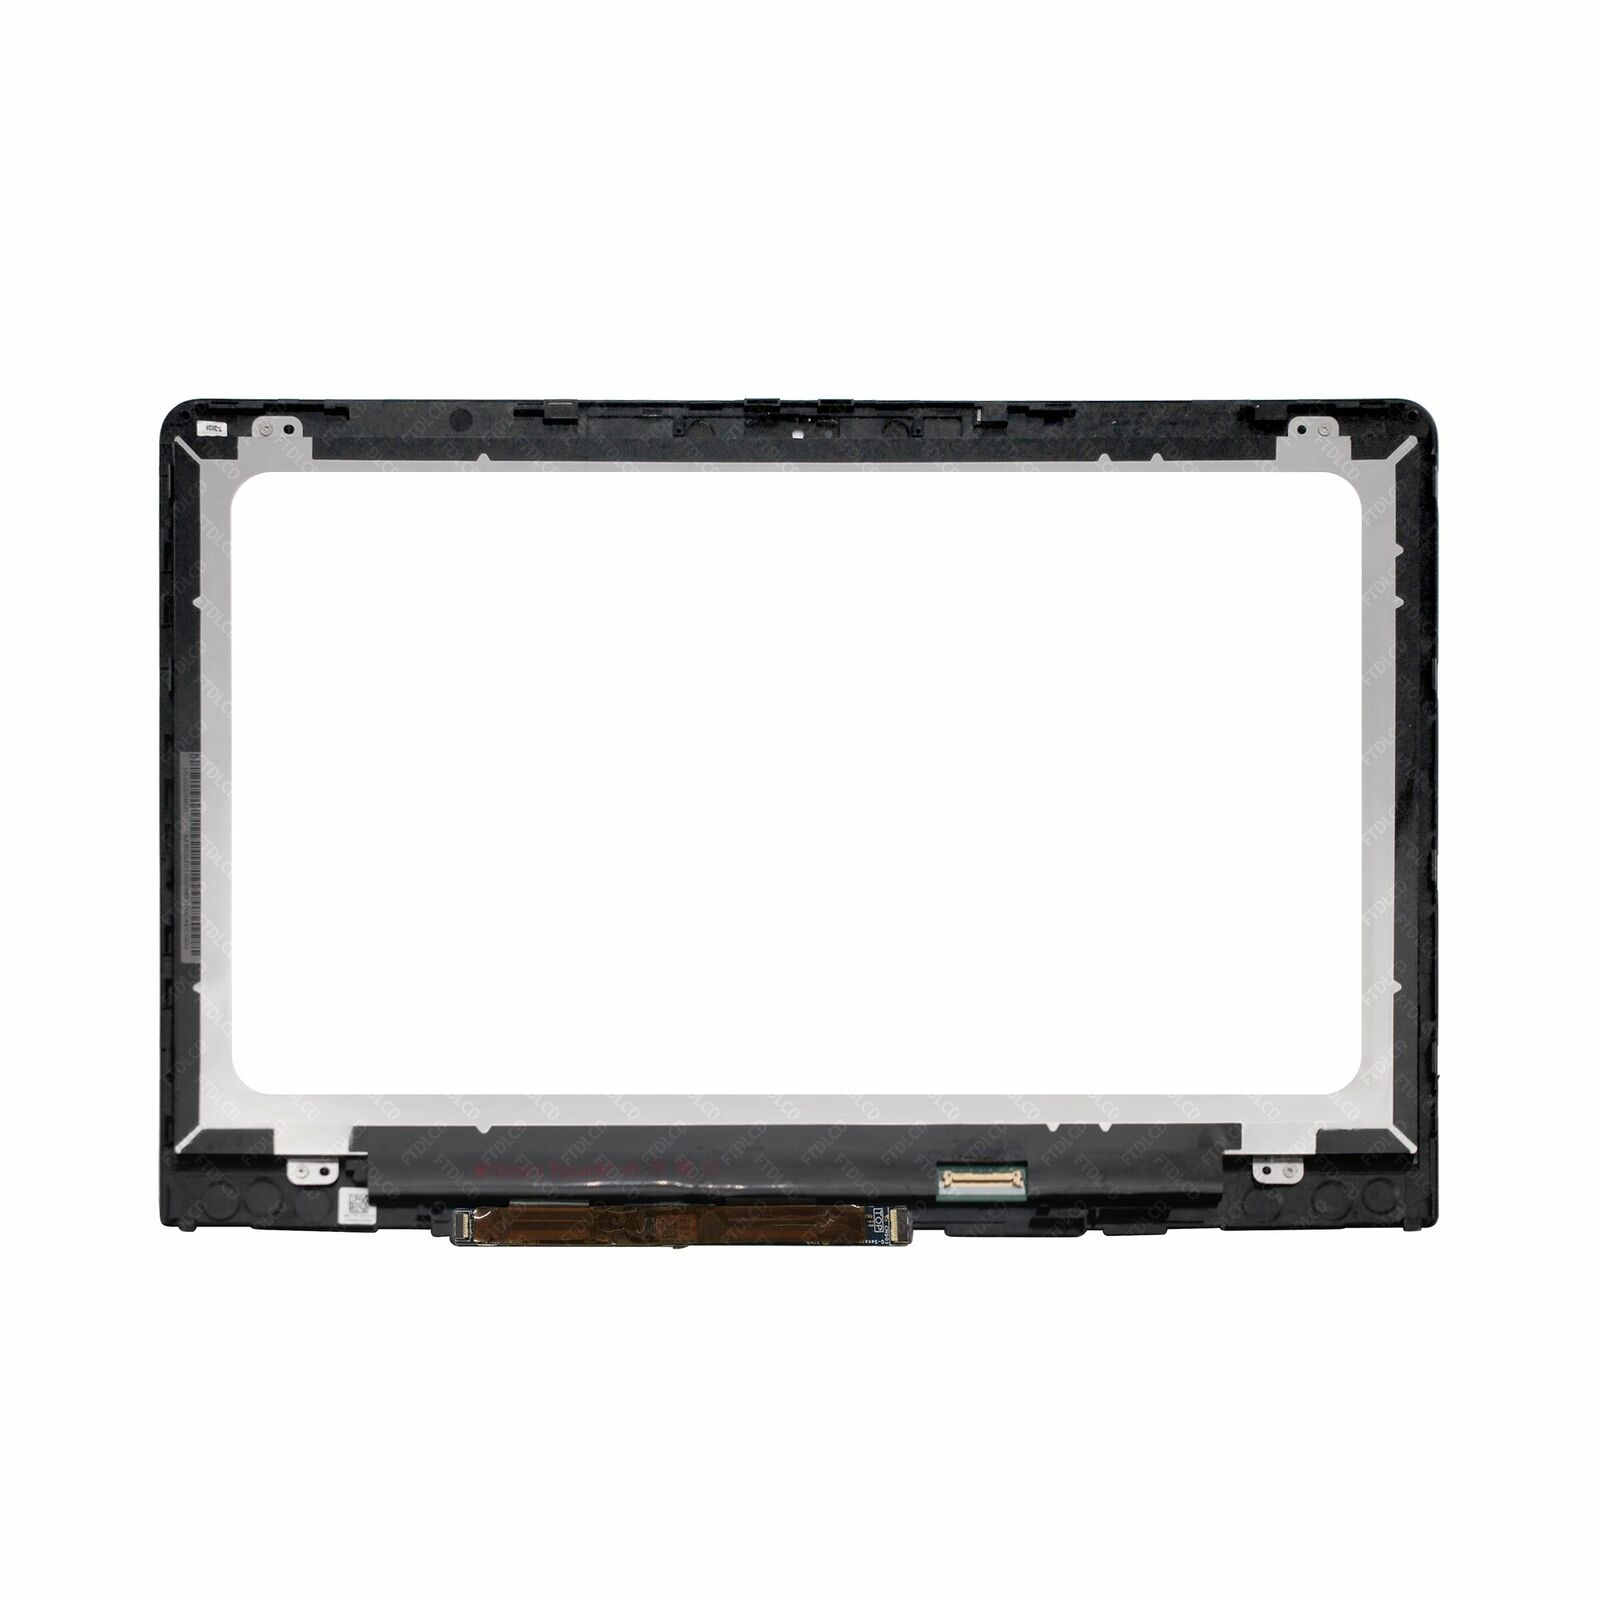 1080P IPS LCD Touch Screen Digitizer Assembly for HP Pavilion x360 14-ba006la at the right price & Fast Shipping,1080P IPS LCD Touch Screen Digitizer Assembly for HP Pavilion x360 14-ba006la online shop,1080P IPS LCD Touch Screen Digitizer Assembly for HP